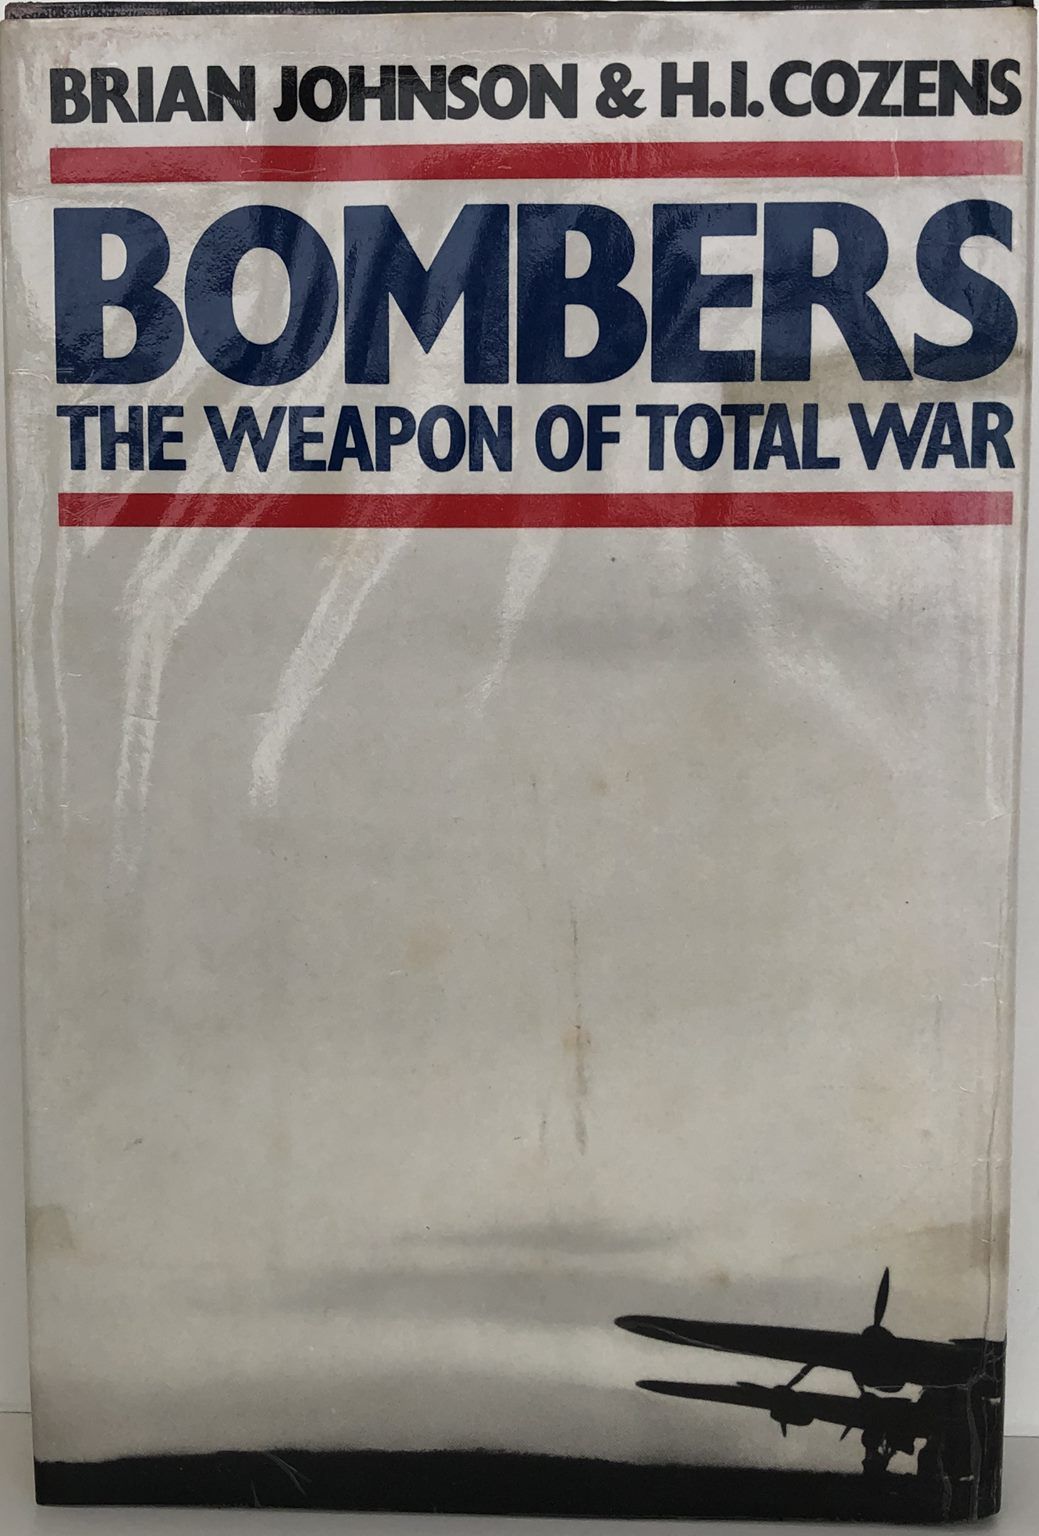 BOMBERS: The Weapon of Total War